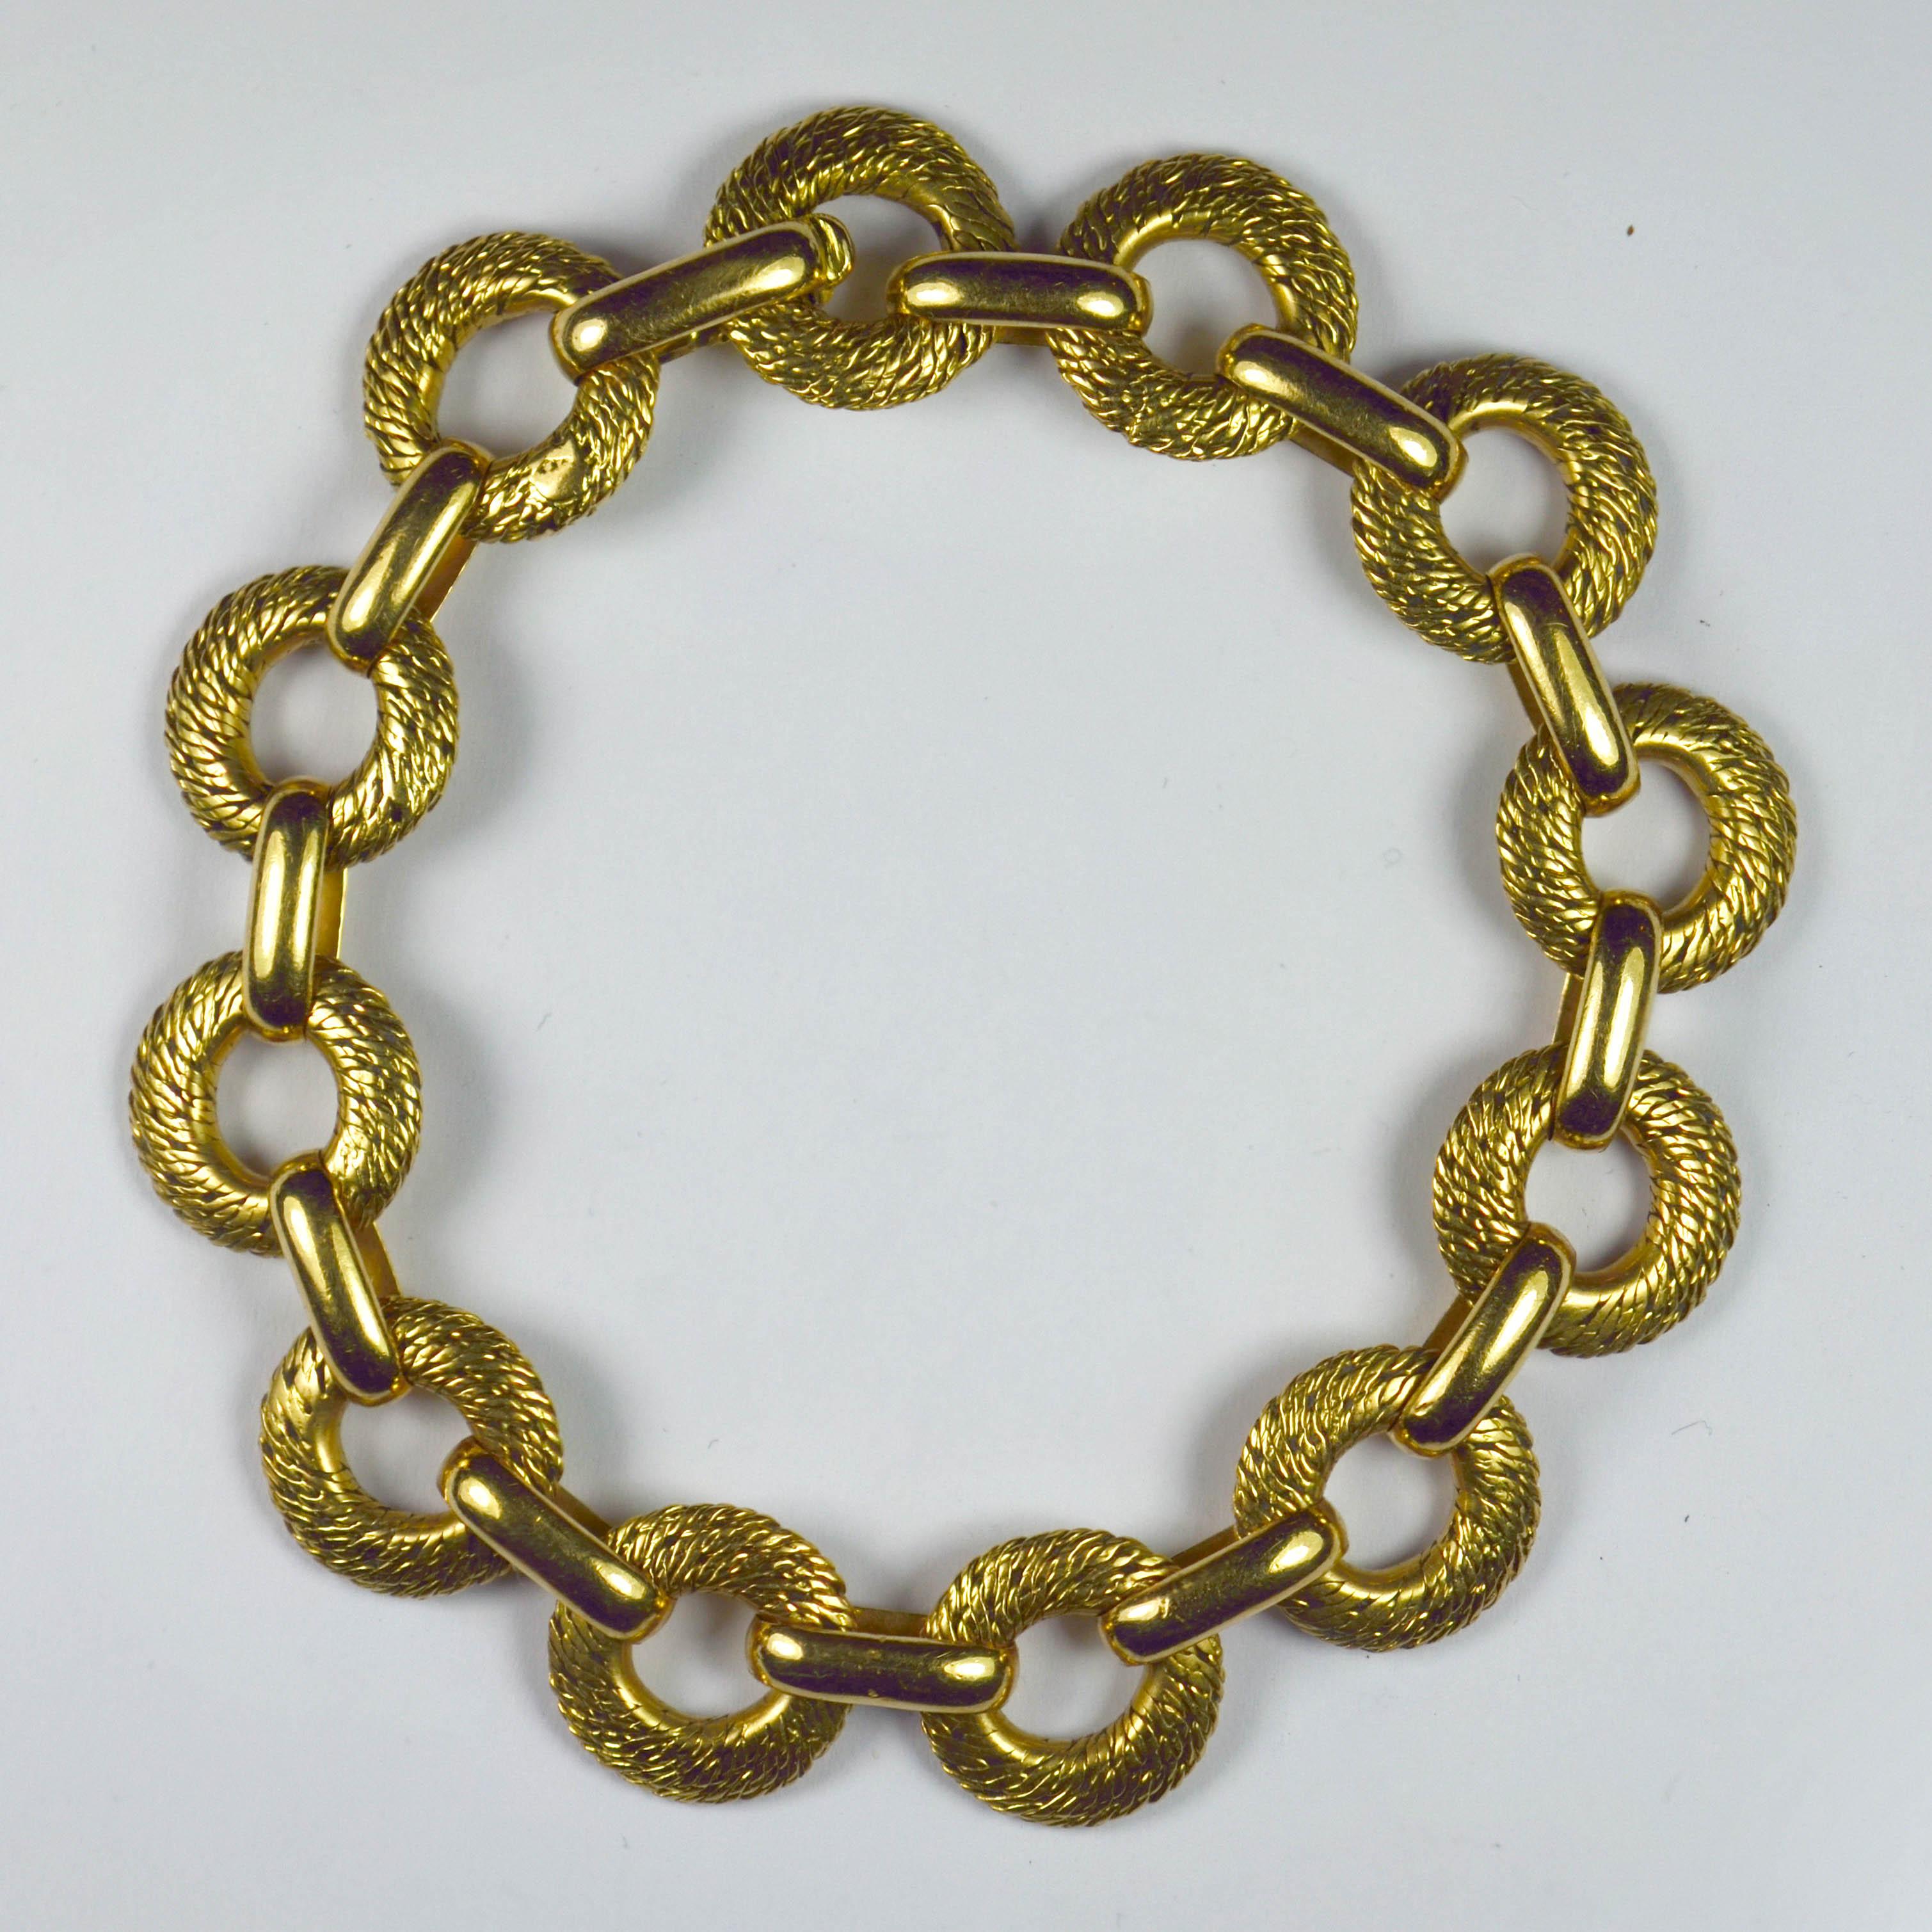 A French 18 karat yellow gold link bracelet by Georges L'Enfant, with 12 textured circular links connected by 12 smooth yellow gold bar links. Stamped with the eagle's head mark for French manufacture and 18 karat gold, with a partial maker's mark